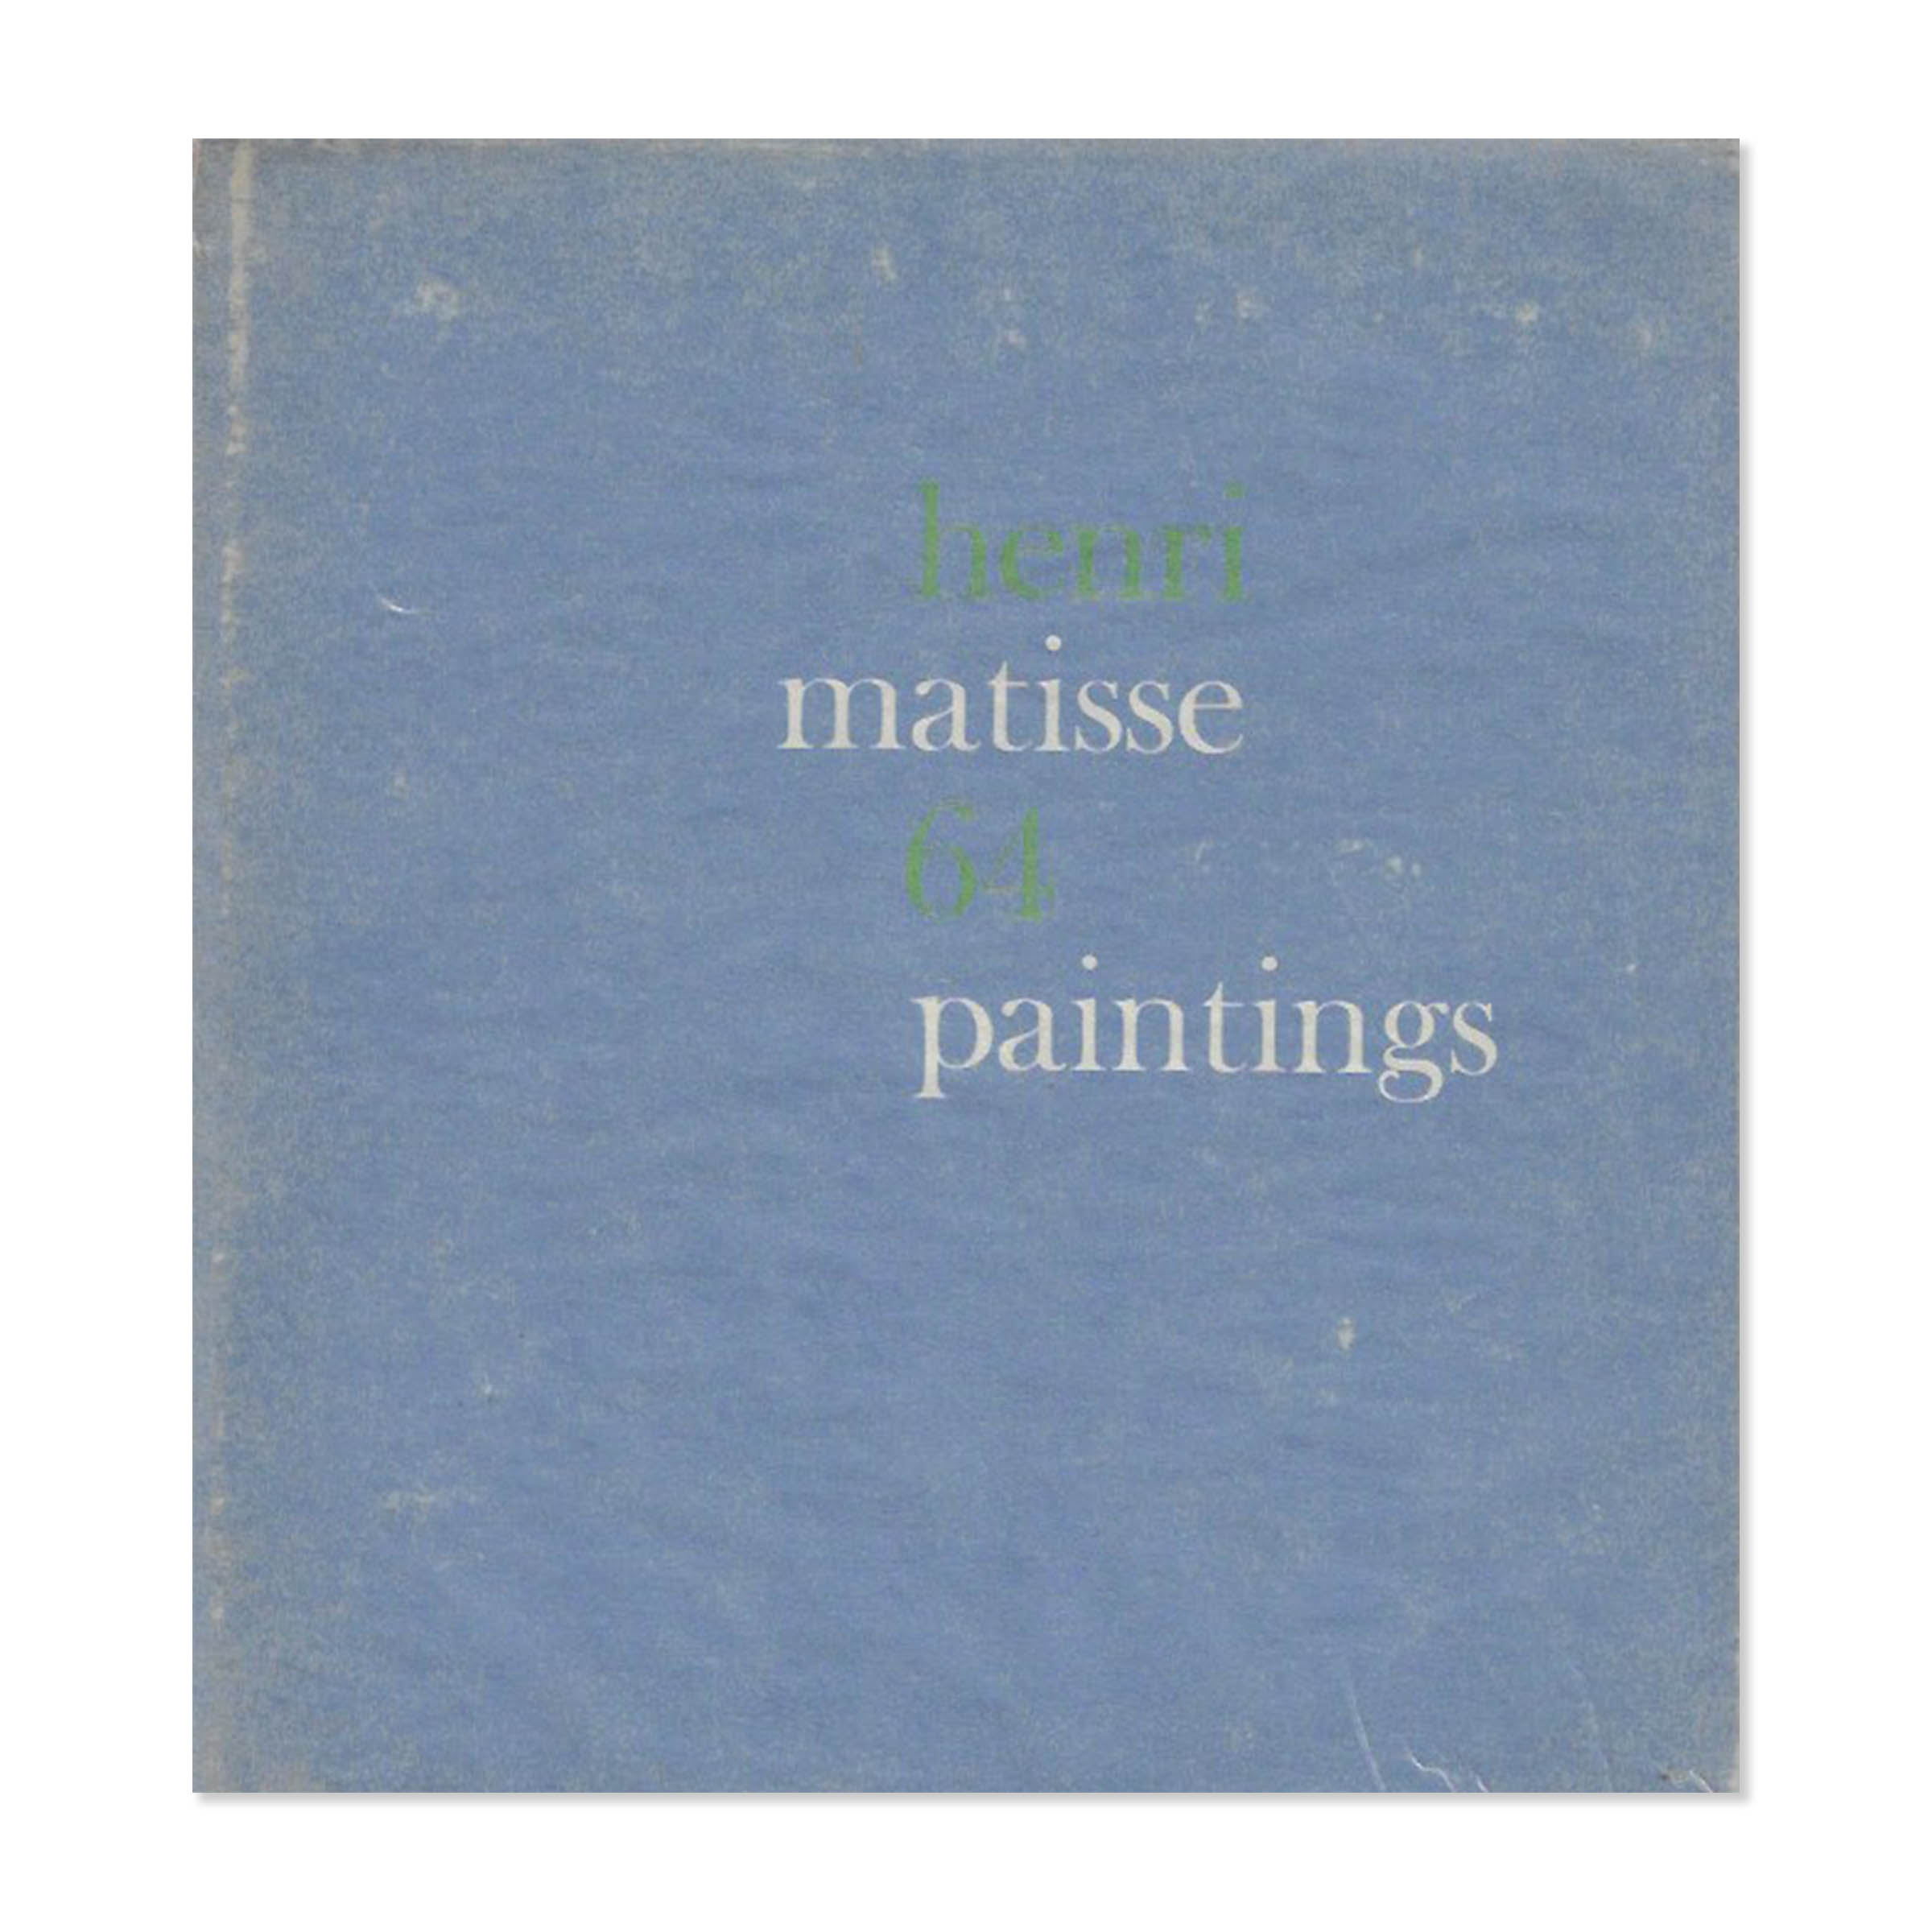 Matisse 64 paintings. Cover view